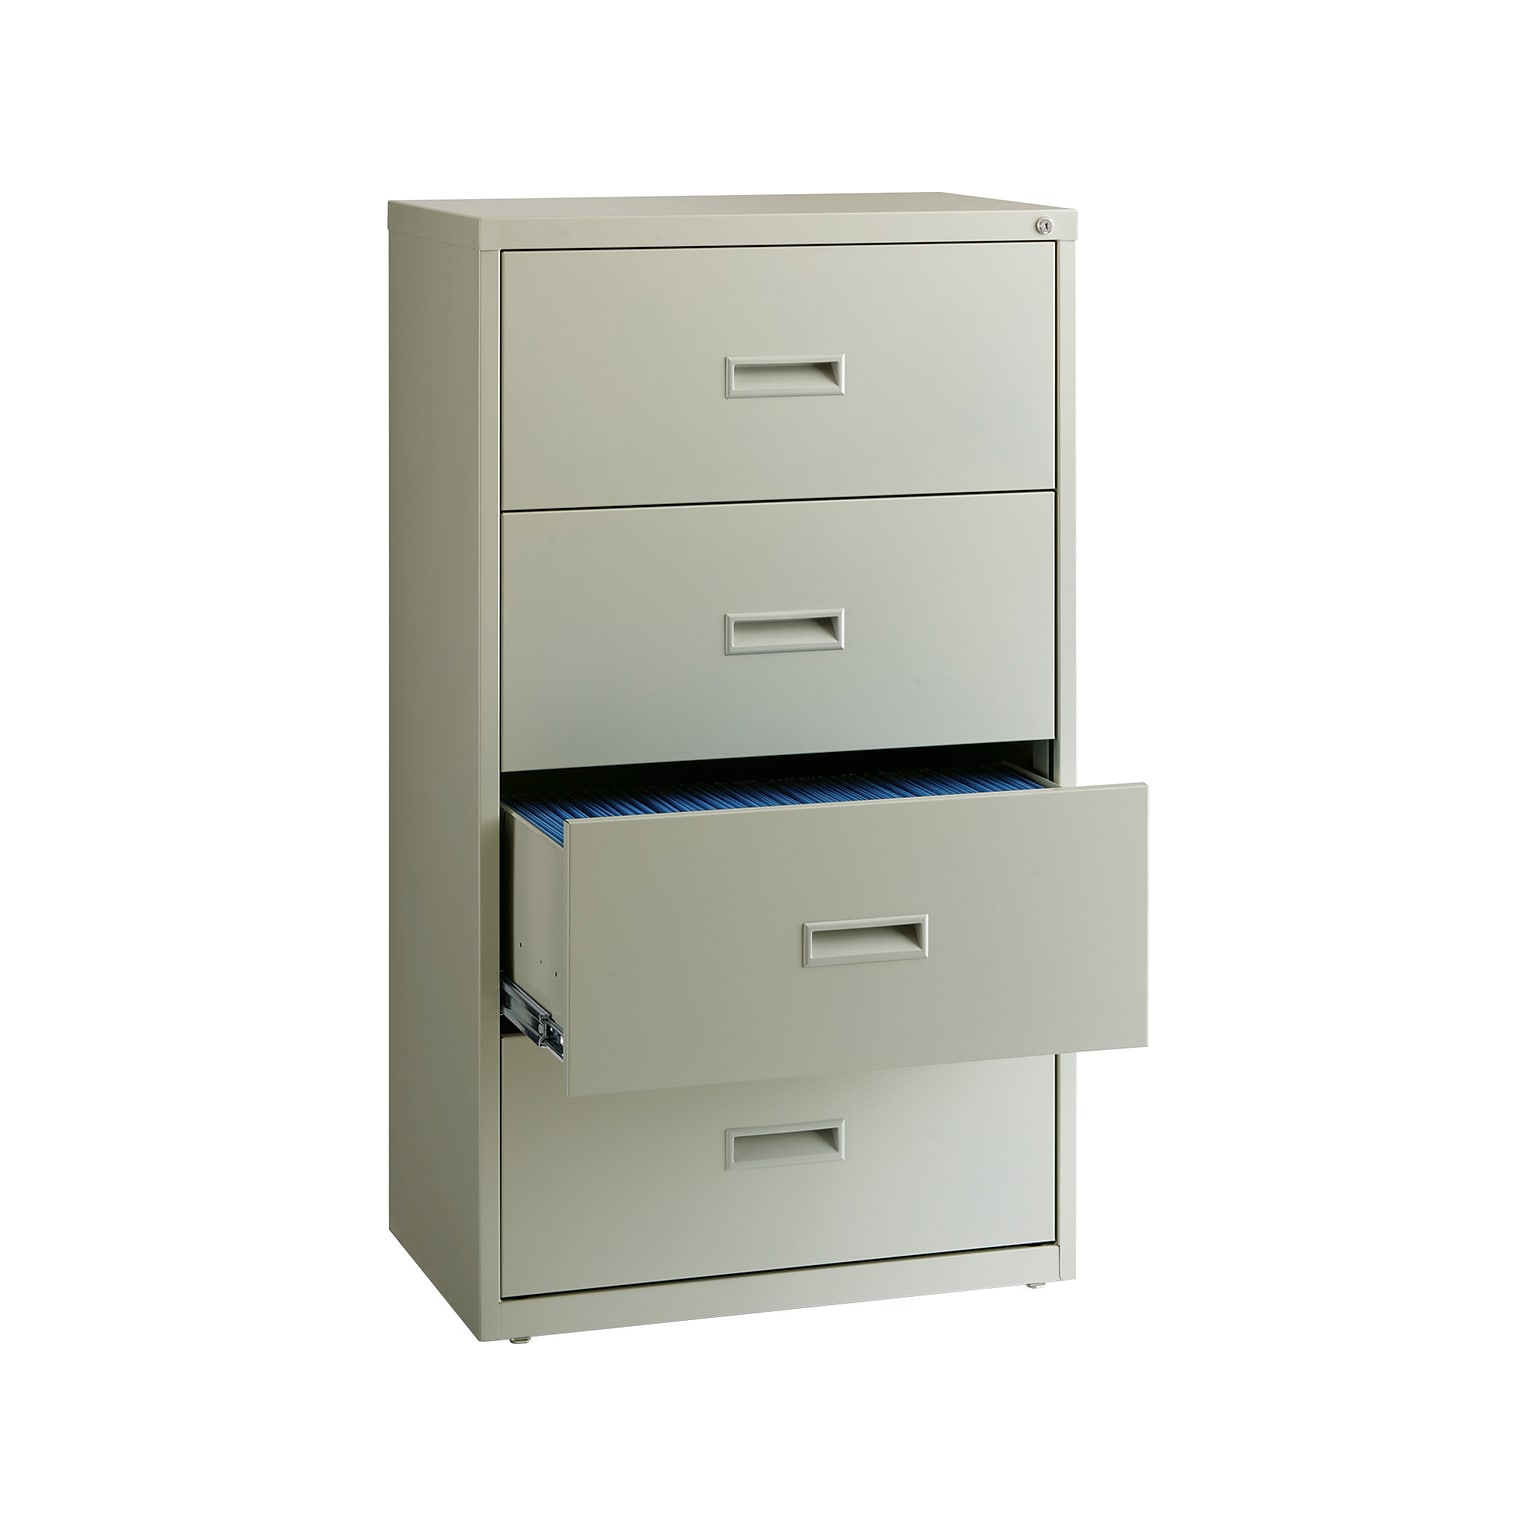 Hirsh HL1000 Series 4-Drawer Lateral File Cabinet, Letter/Legal Size, Lockable, 52.5H x 30W x 18.63D, Light Gray (19440)